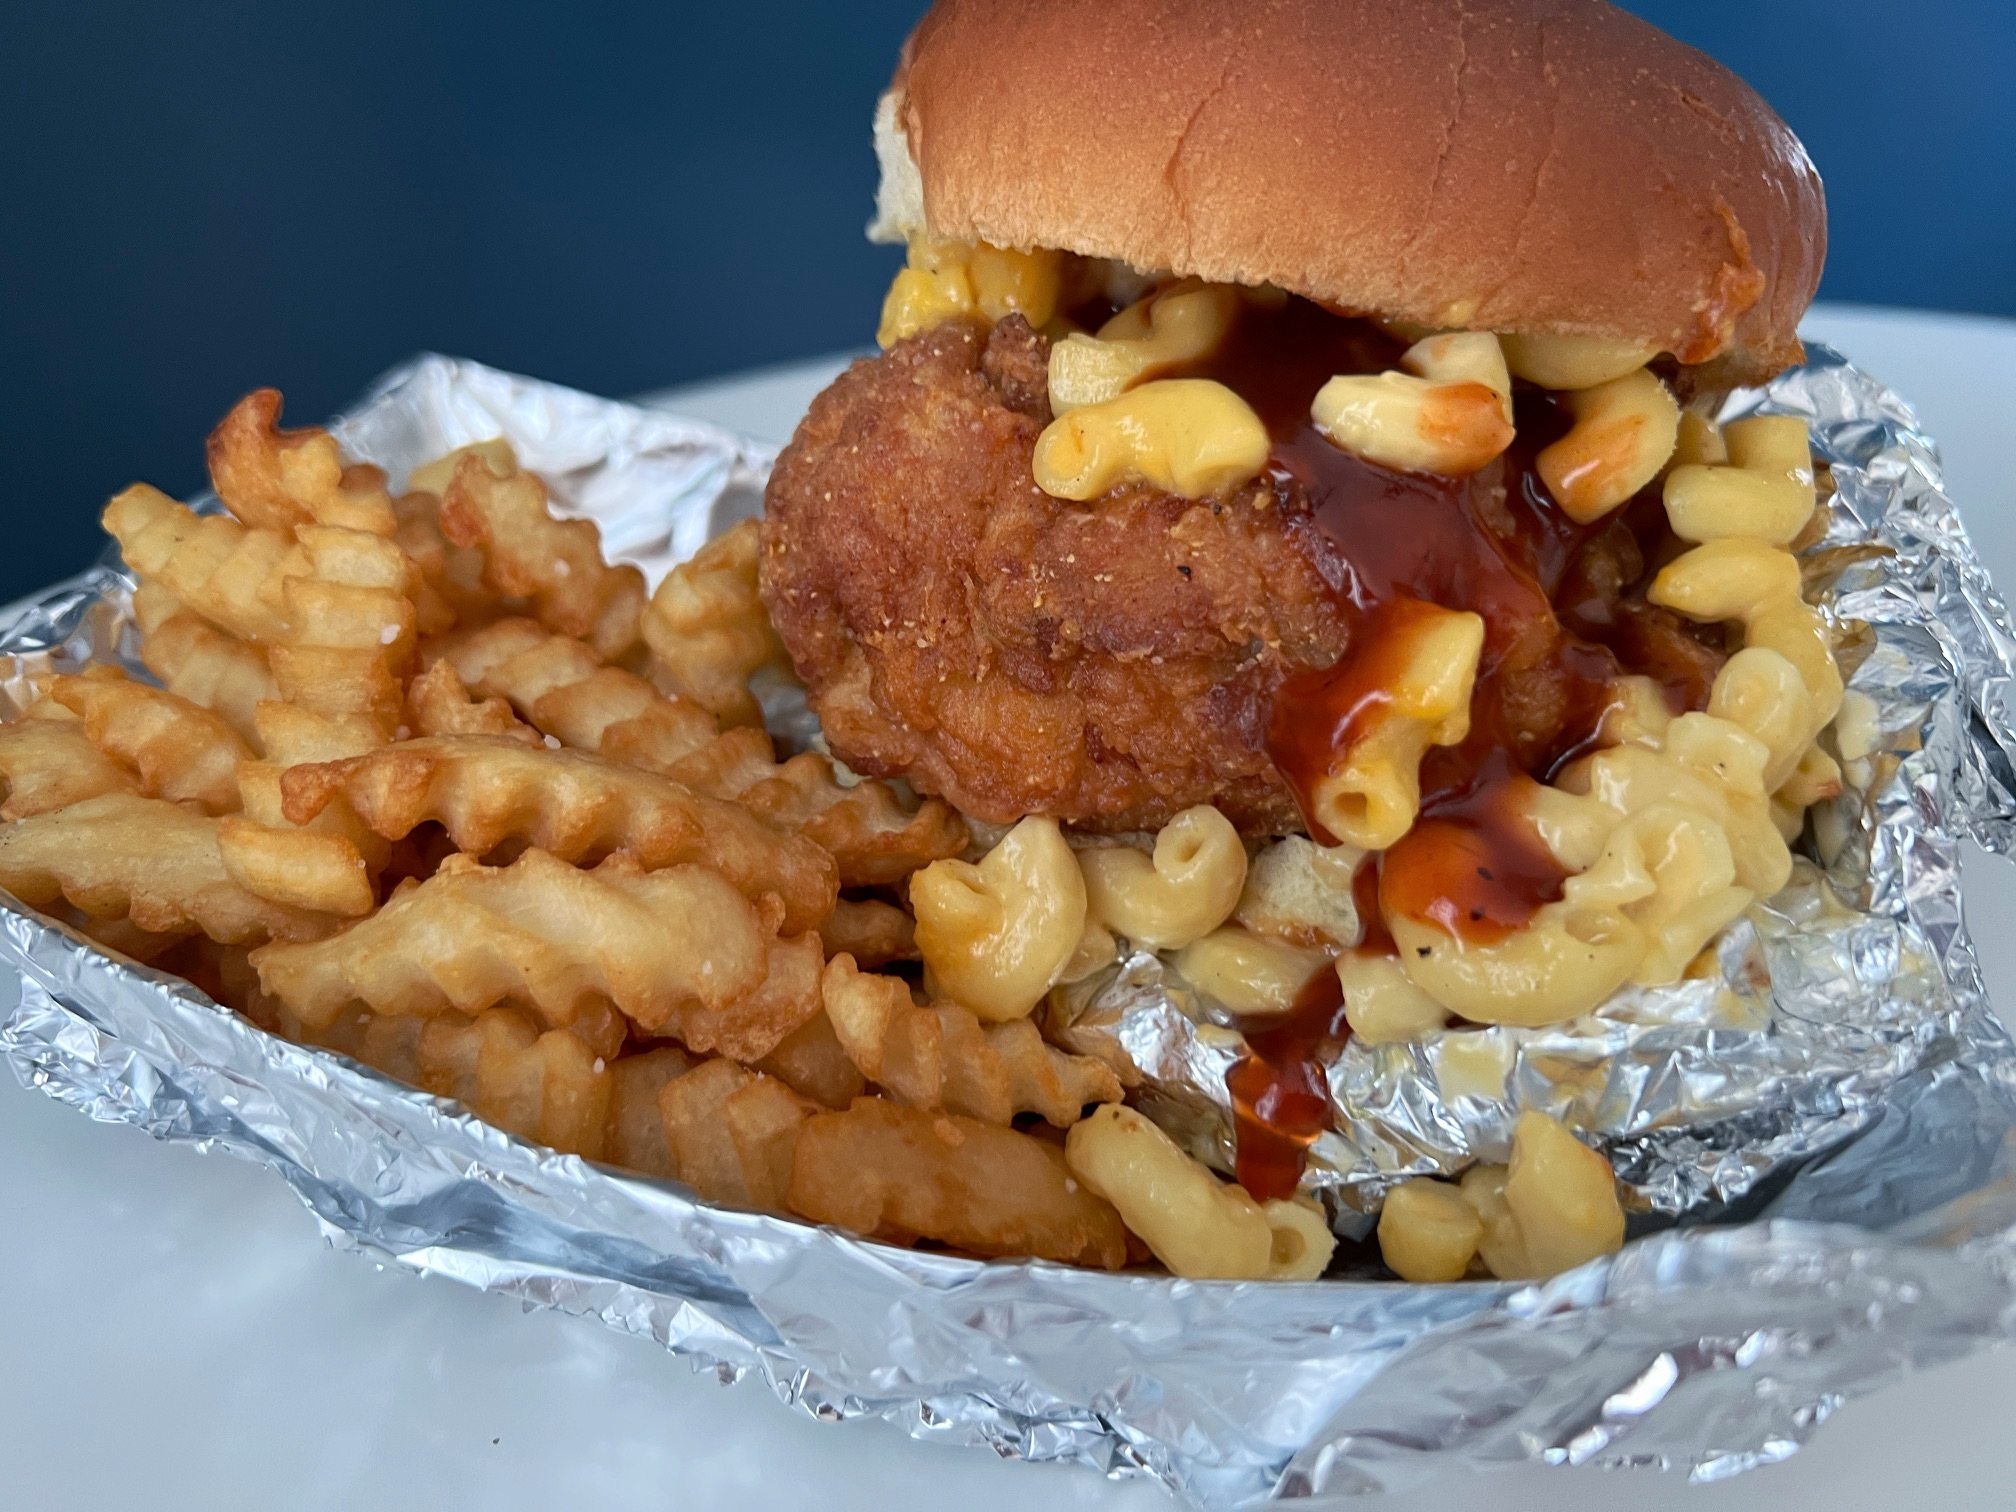 In a tin-foil lined basket, there is a fried chicken sandwich with macaroni and drippy hot sauce on a bed of crinkle fries from The Stuft Bird in Champaign, Illinois. Photo by Alyssa Buckley.